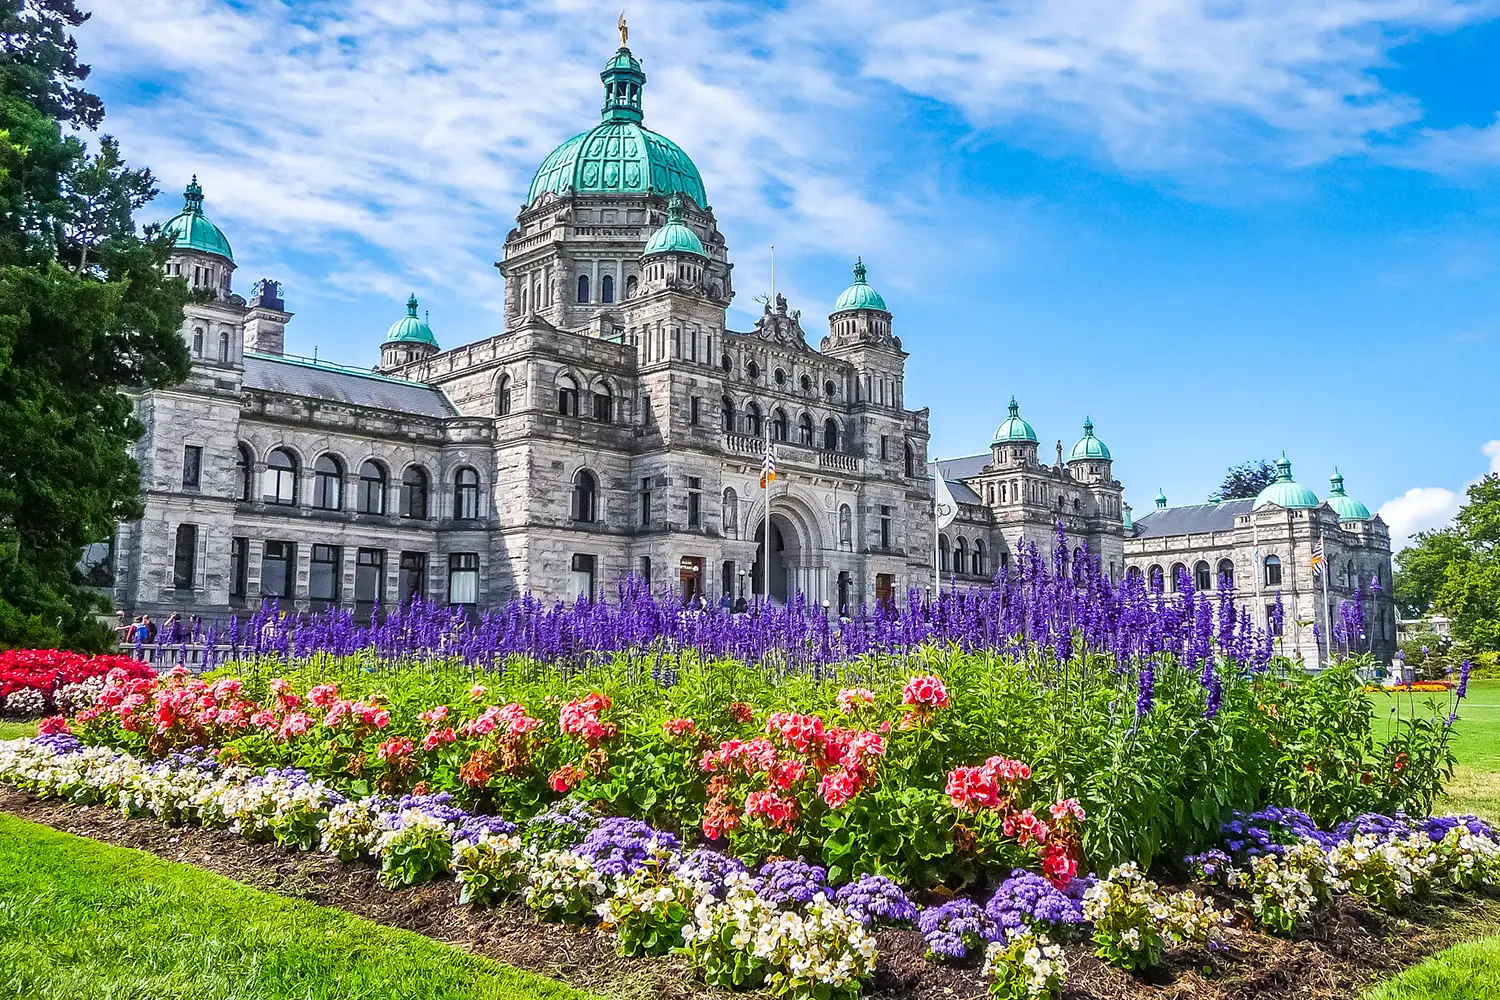 Historic parliament building in Victoria with colorful flowers, BC, Canada